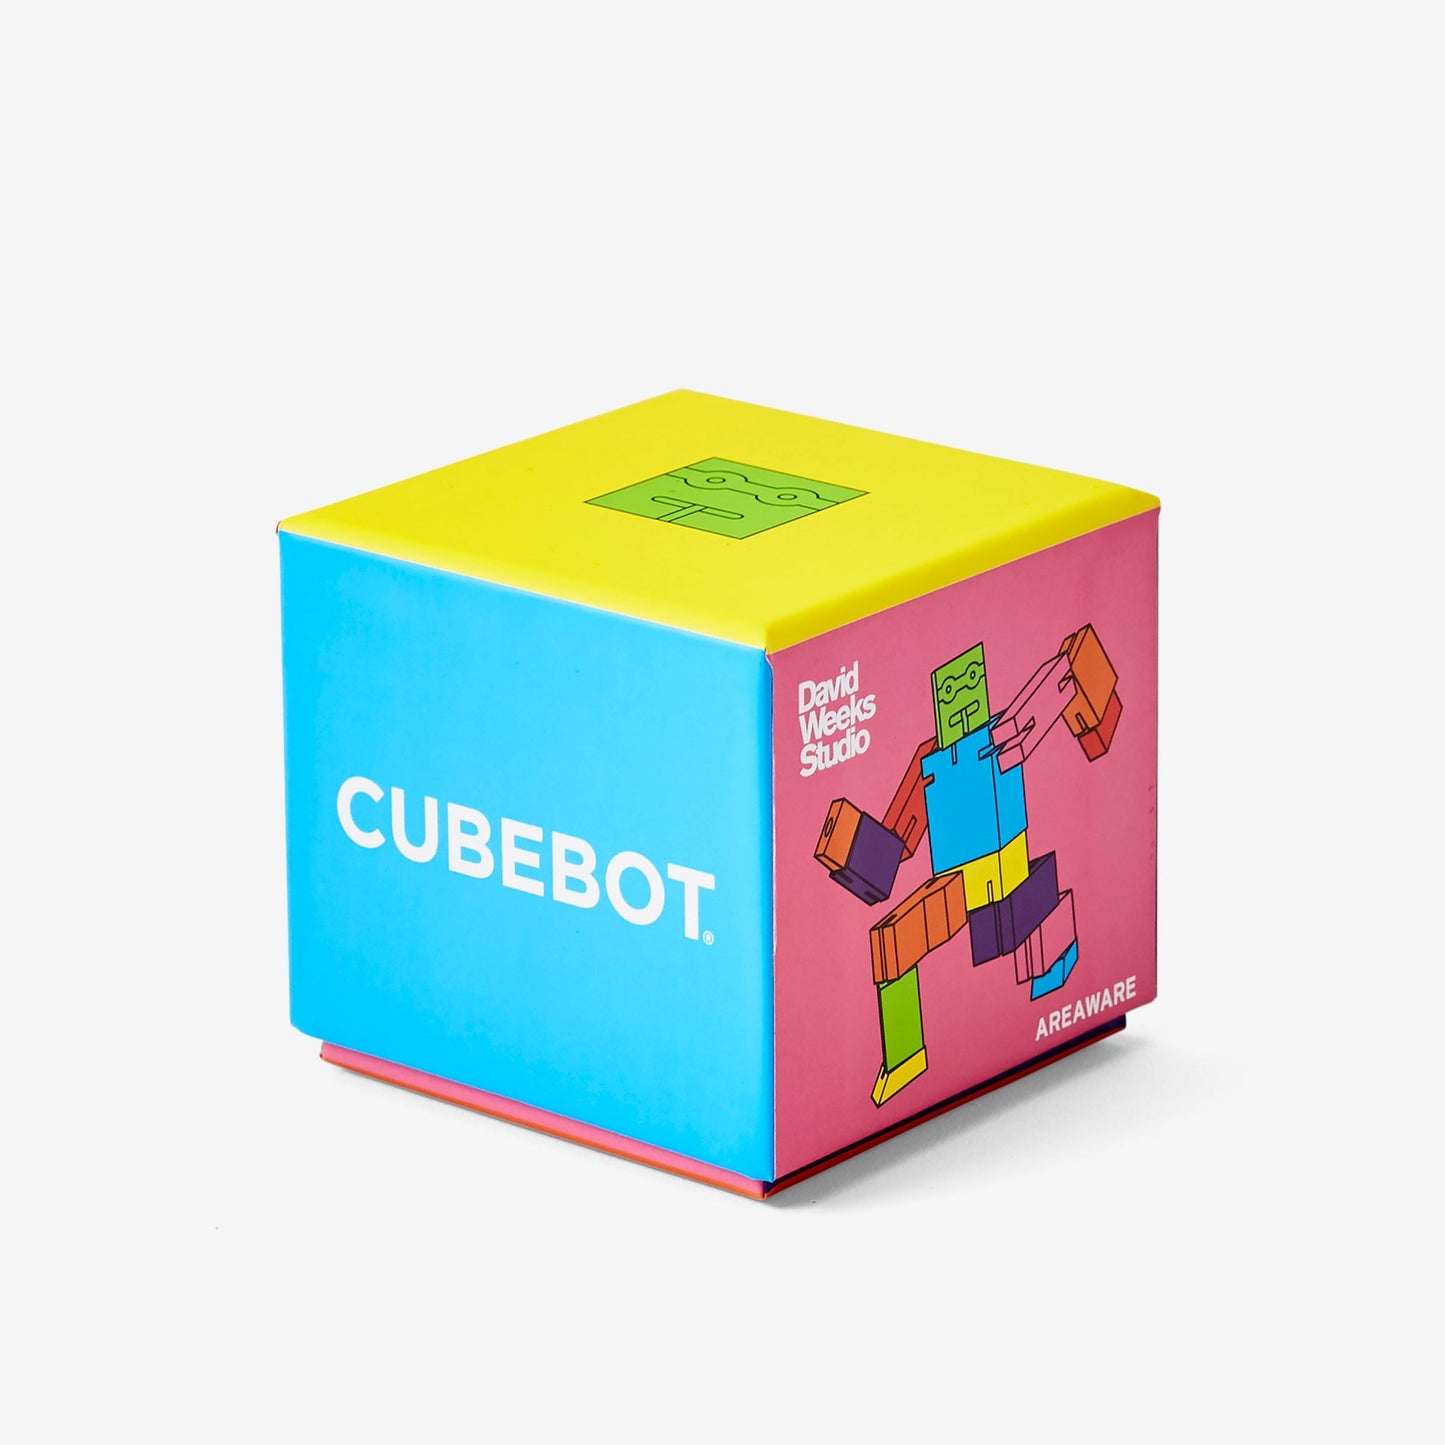 Cubebot small multi by David Weeks for Areaware